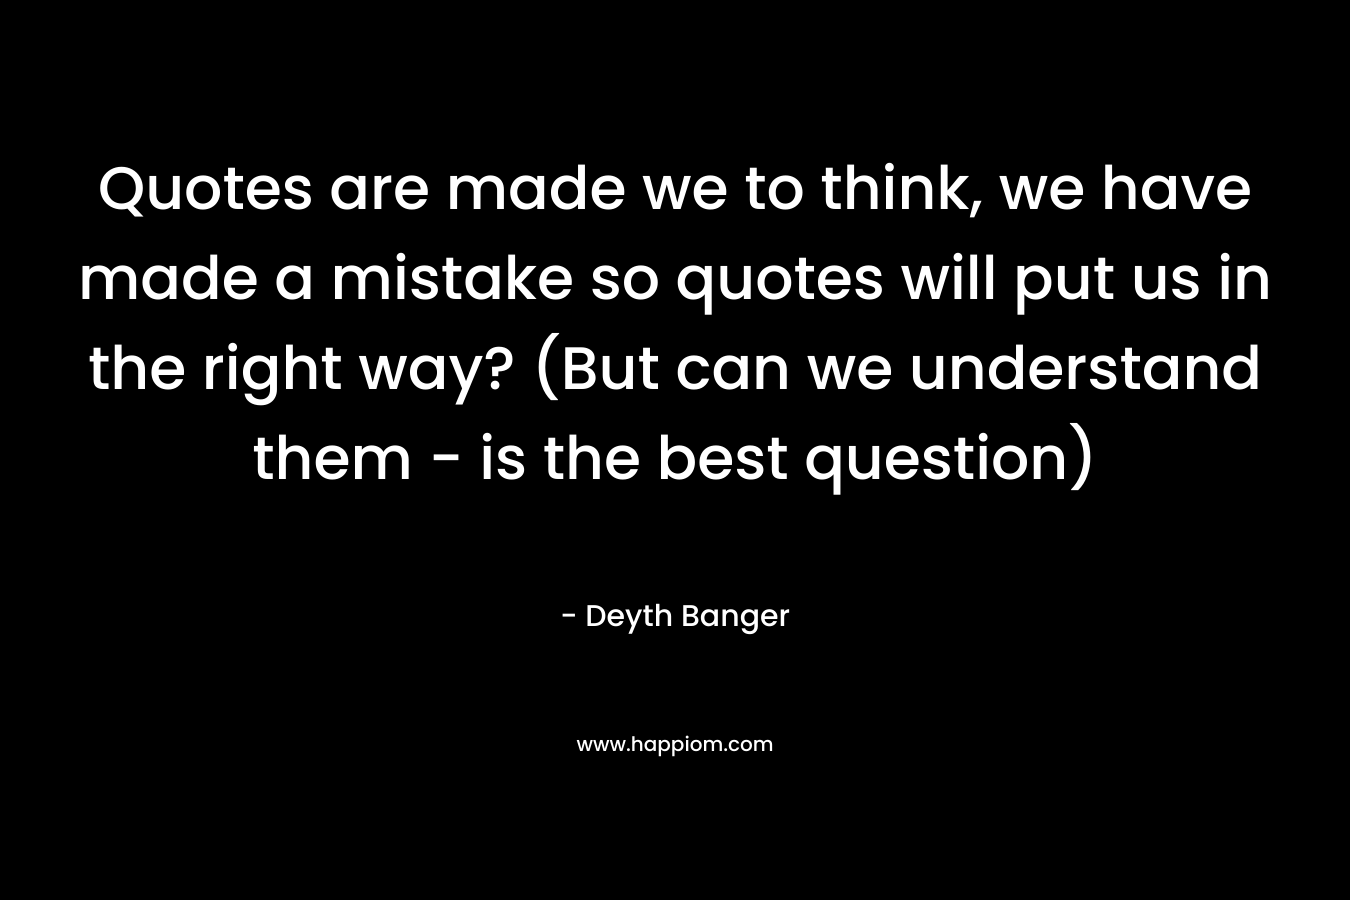 Quotes are made we to think, we have made a mistake so quotes will put us in the right way? (But can we understand them - is the best question)